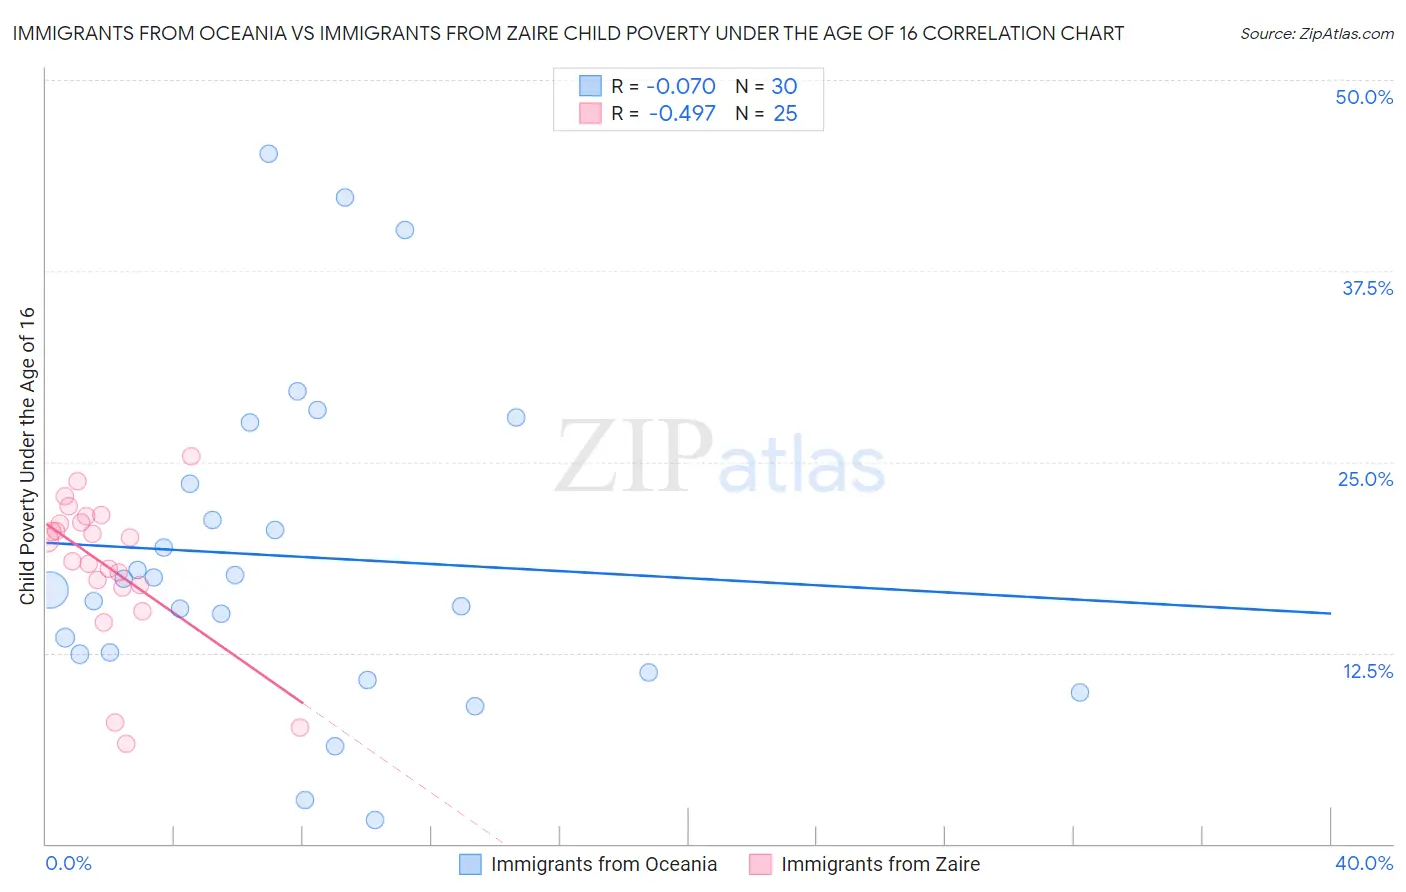 Immigrants from Oceania vs Immigrants from Zaire Child Poverty Under the Age of 16